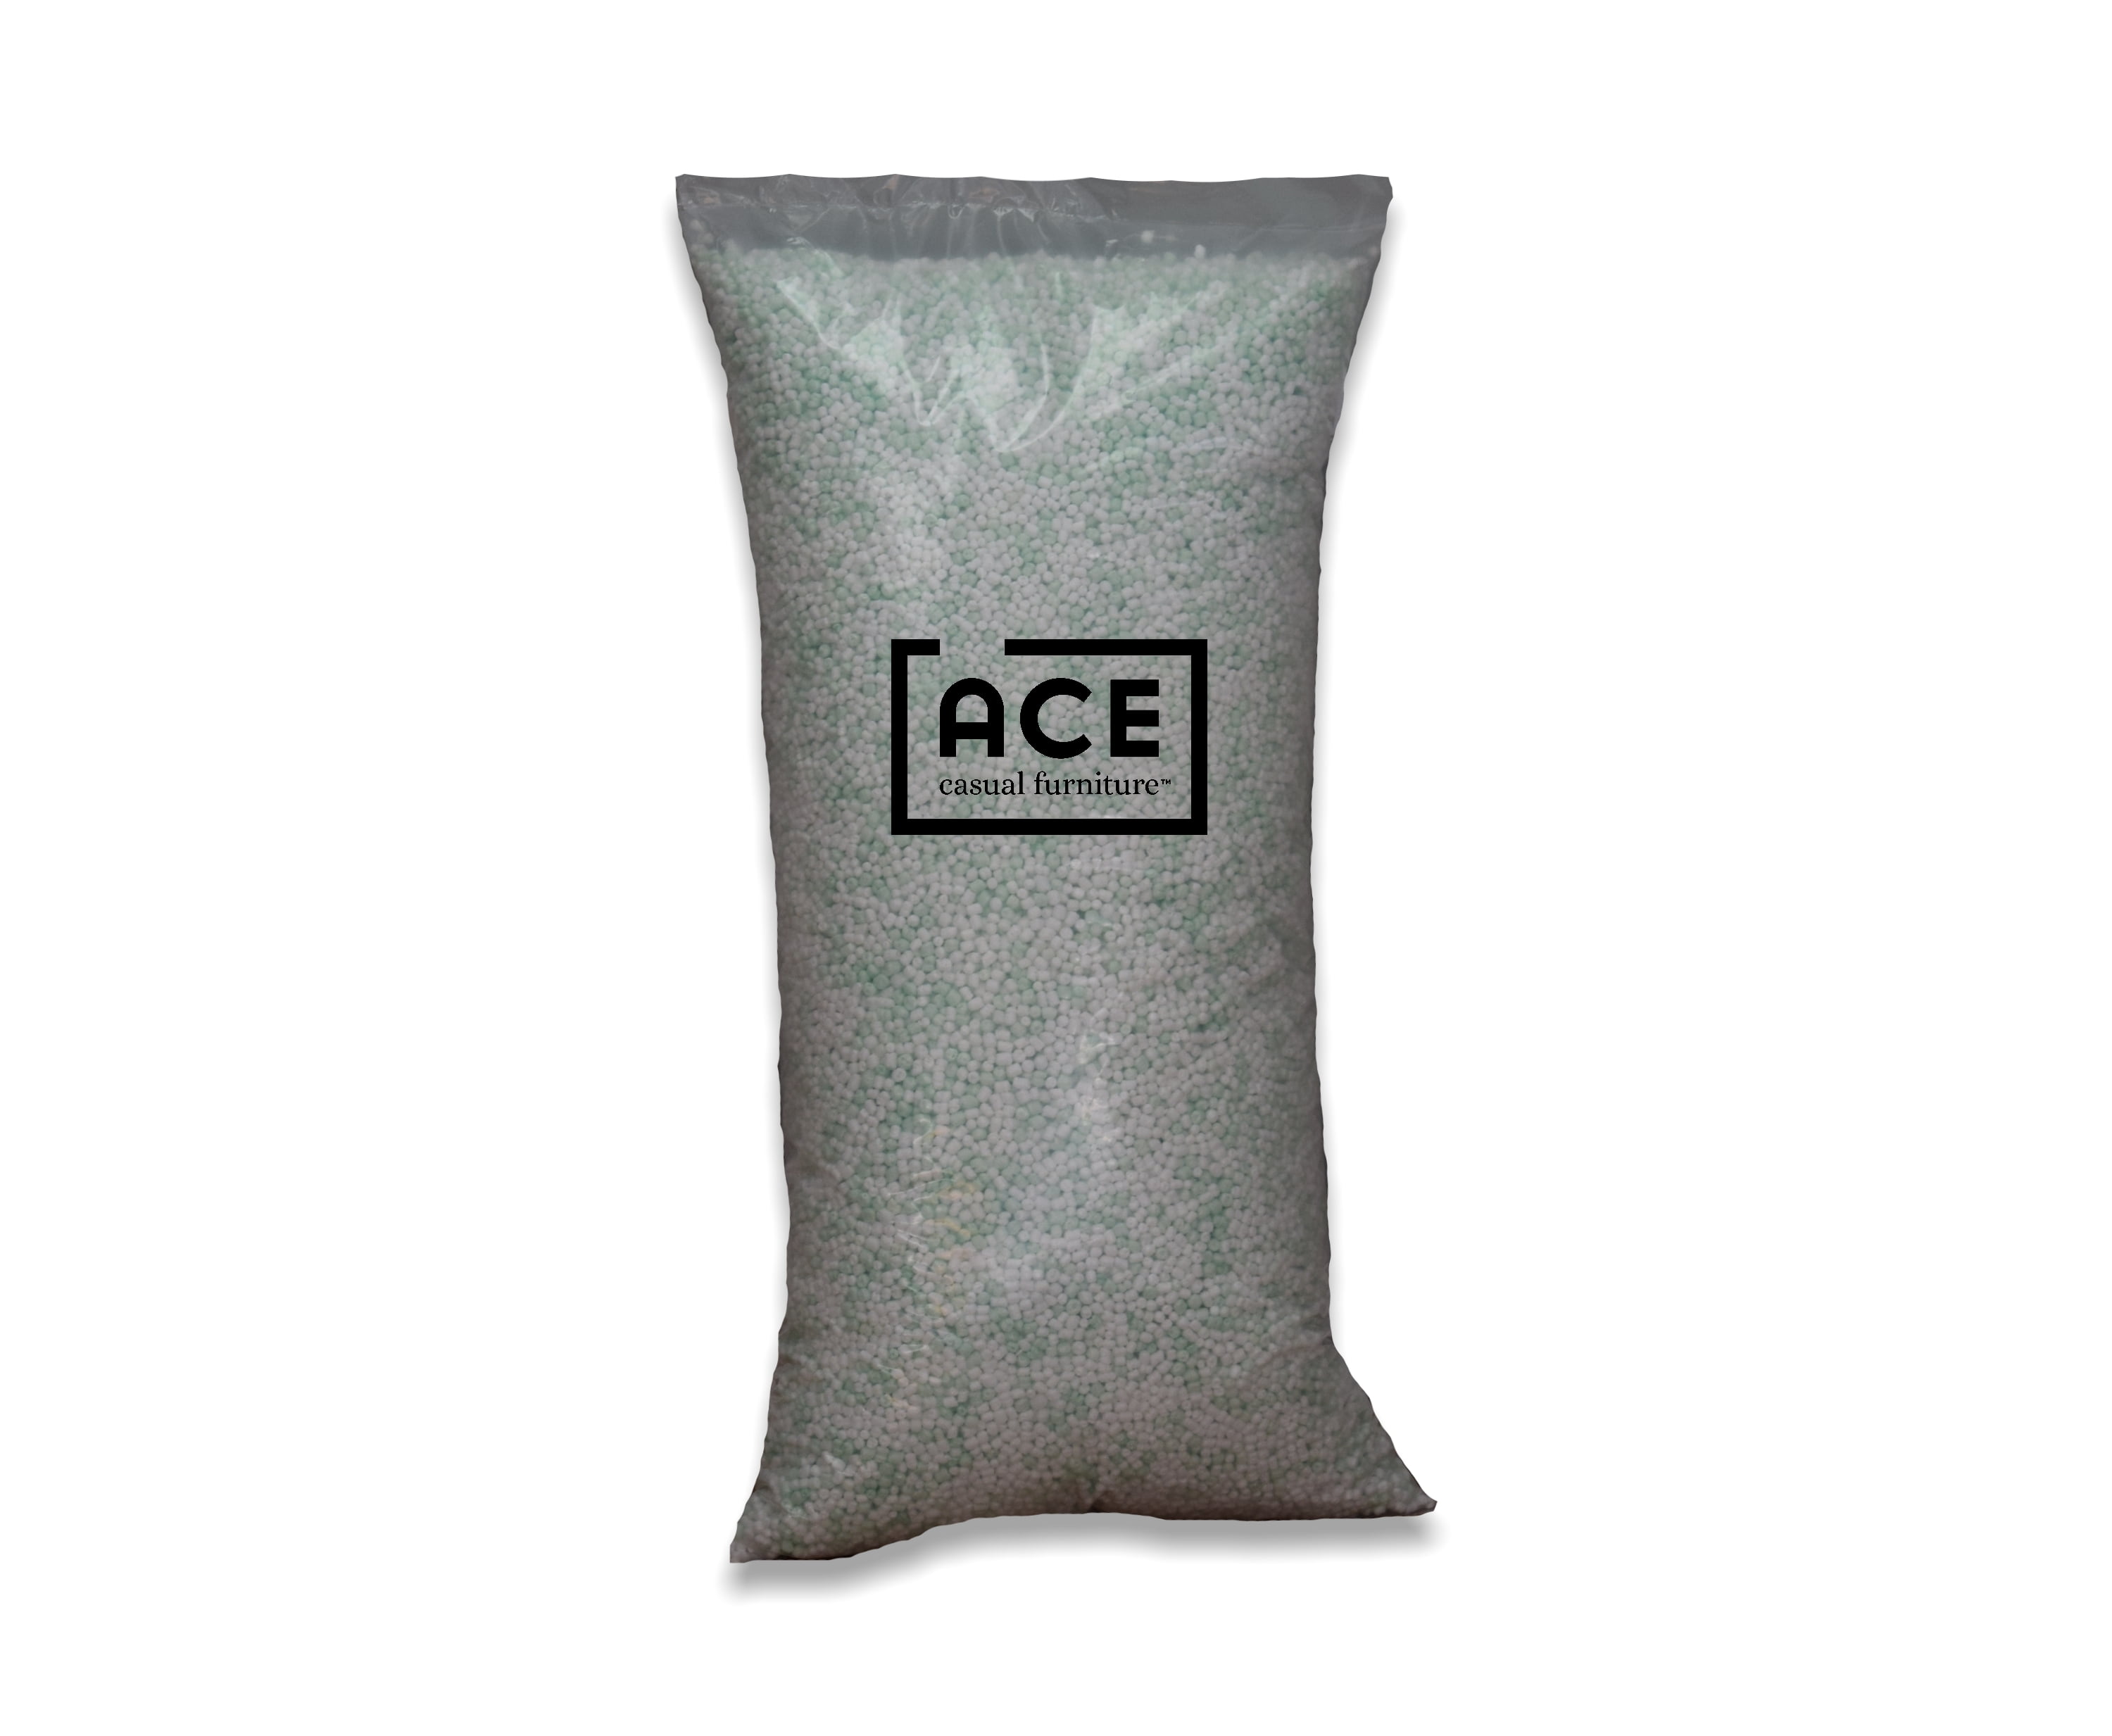 ACEssentials Polystrene Bean Refill for Crafts and Filler for Bean Bag  Chairs, 100 liters, 3.5 cubic feet 